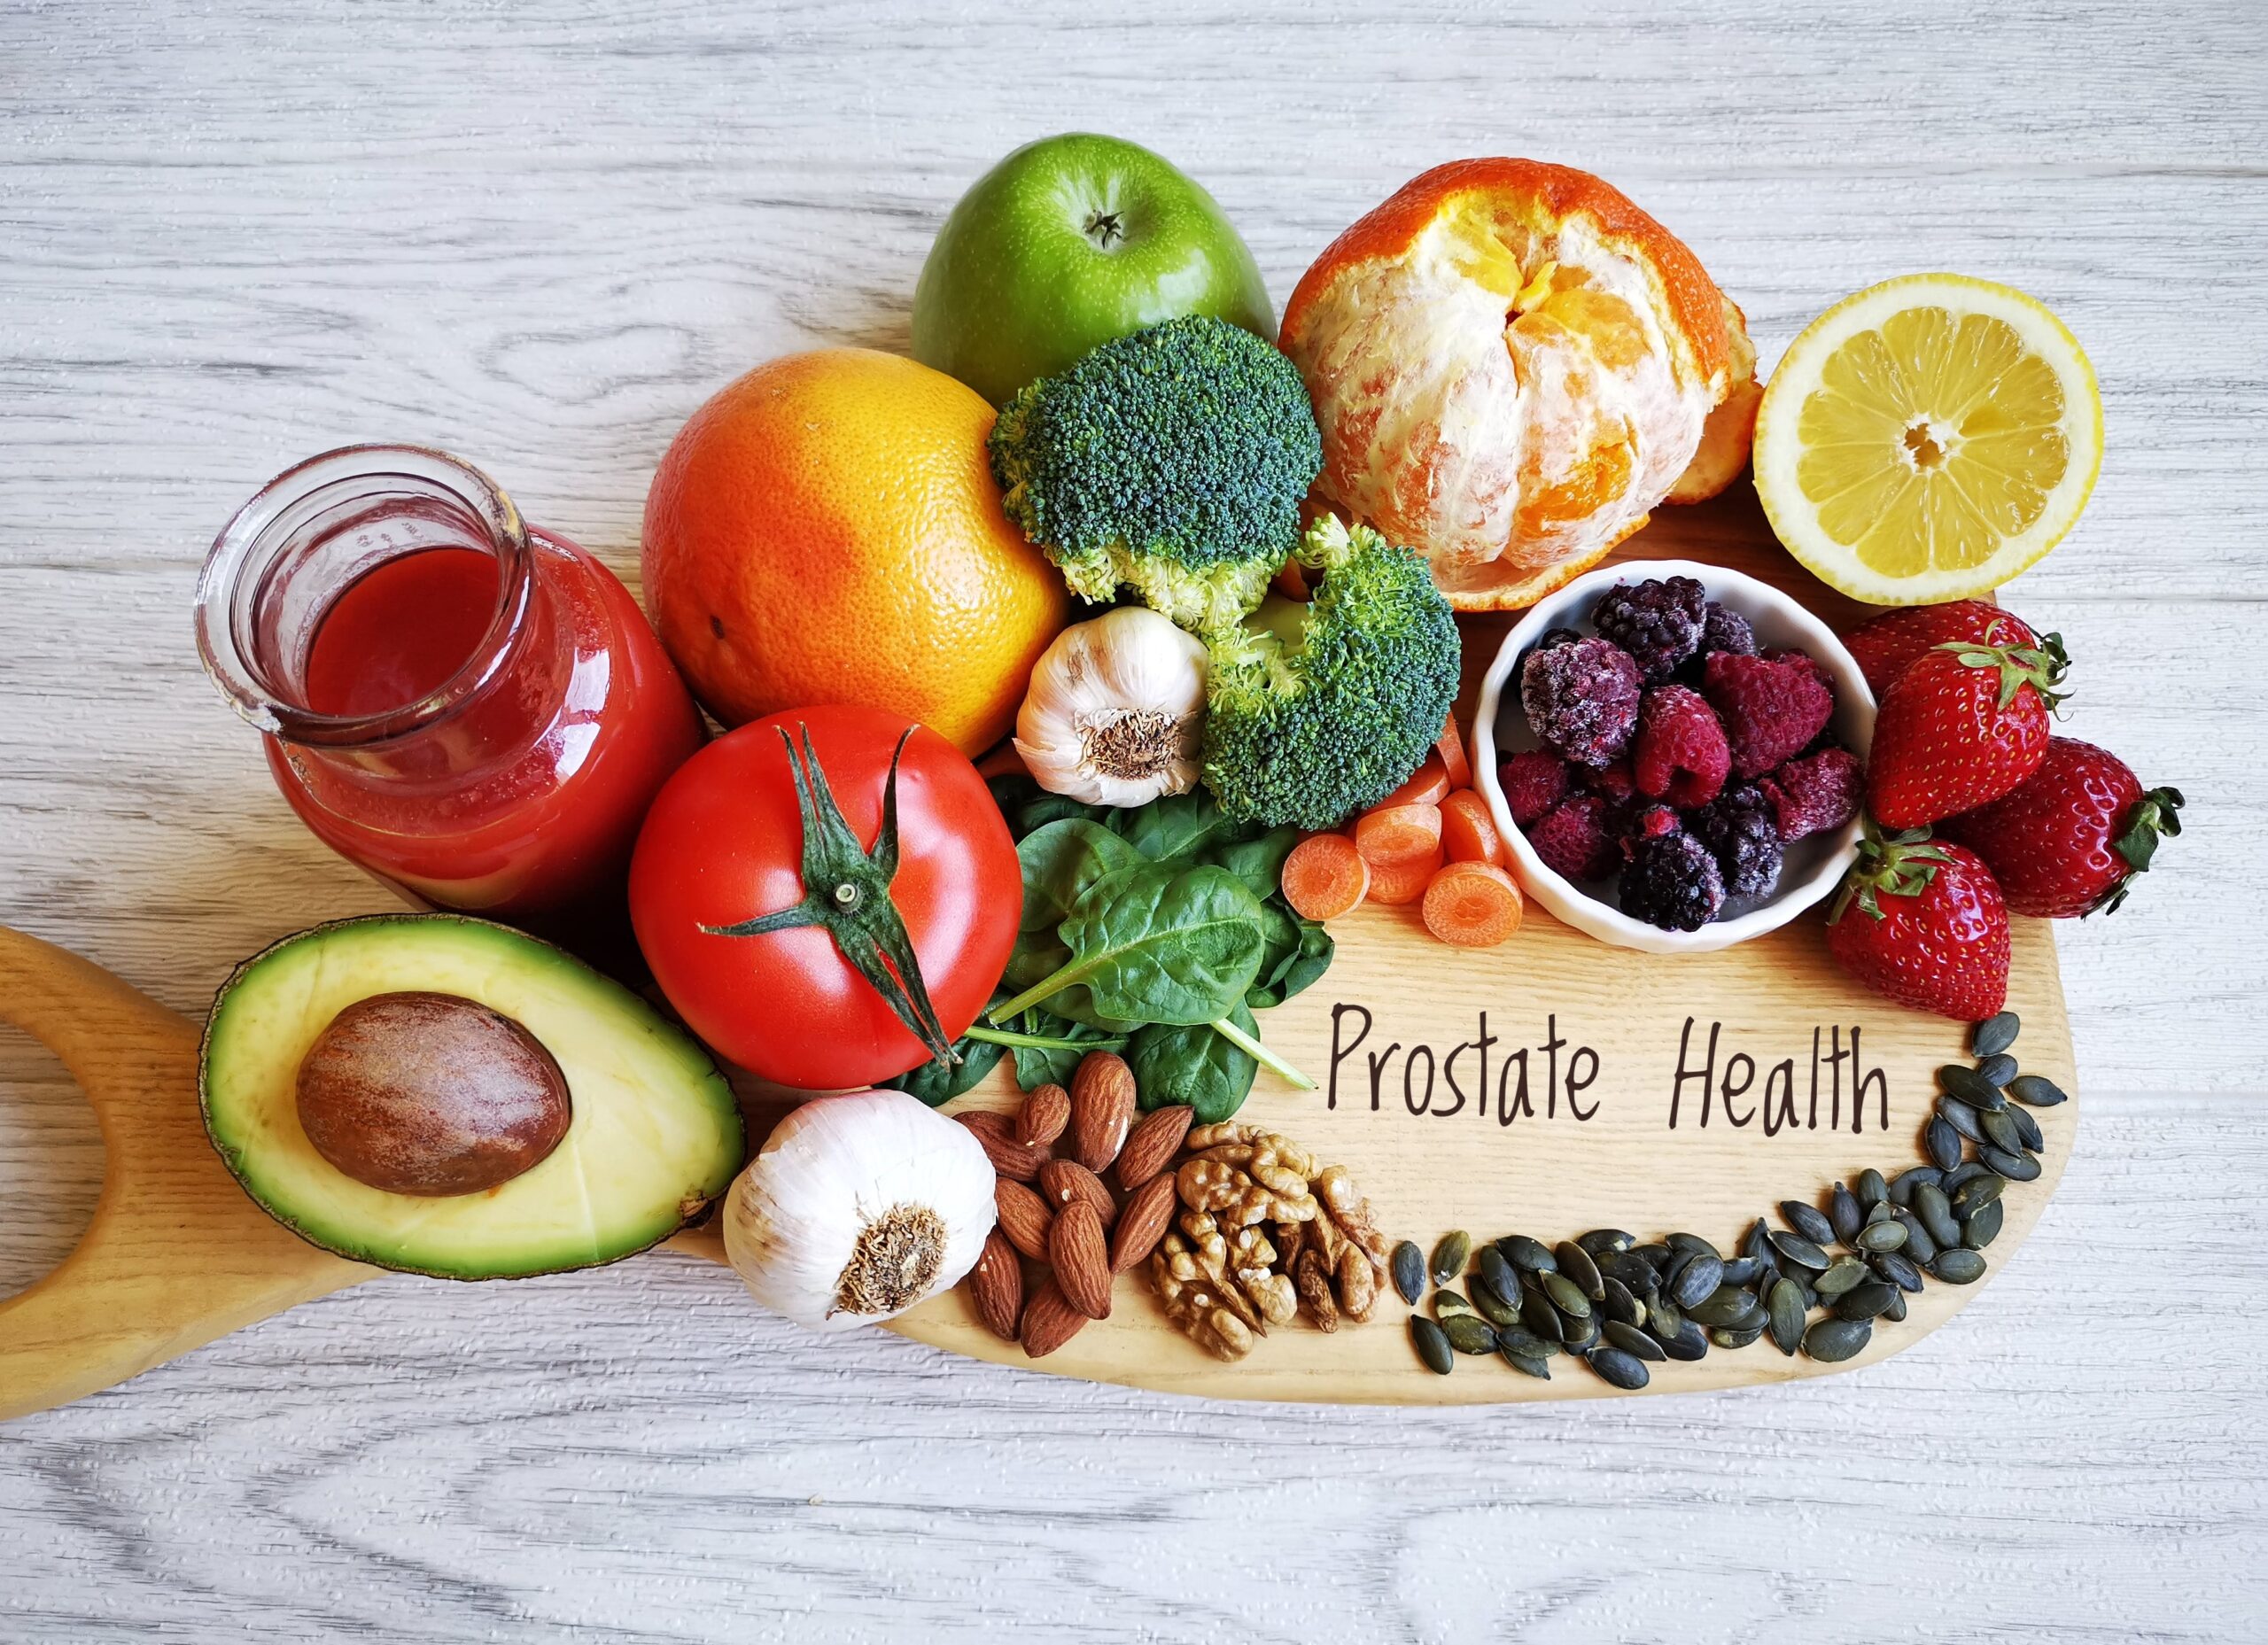 fruits and vegetables around prostate health sign.